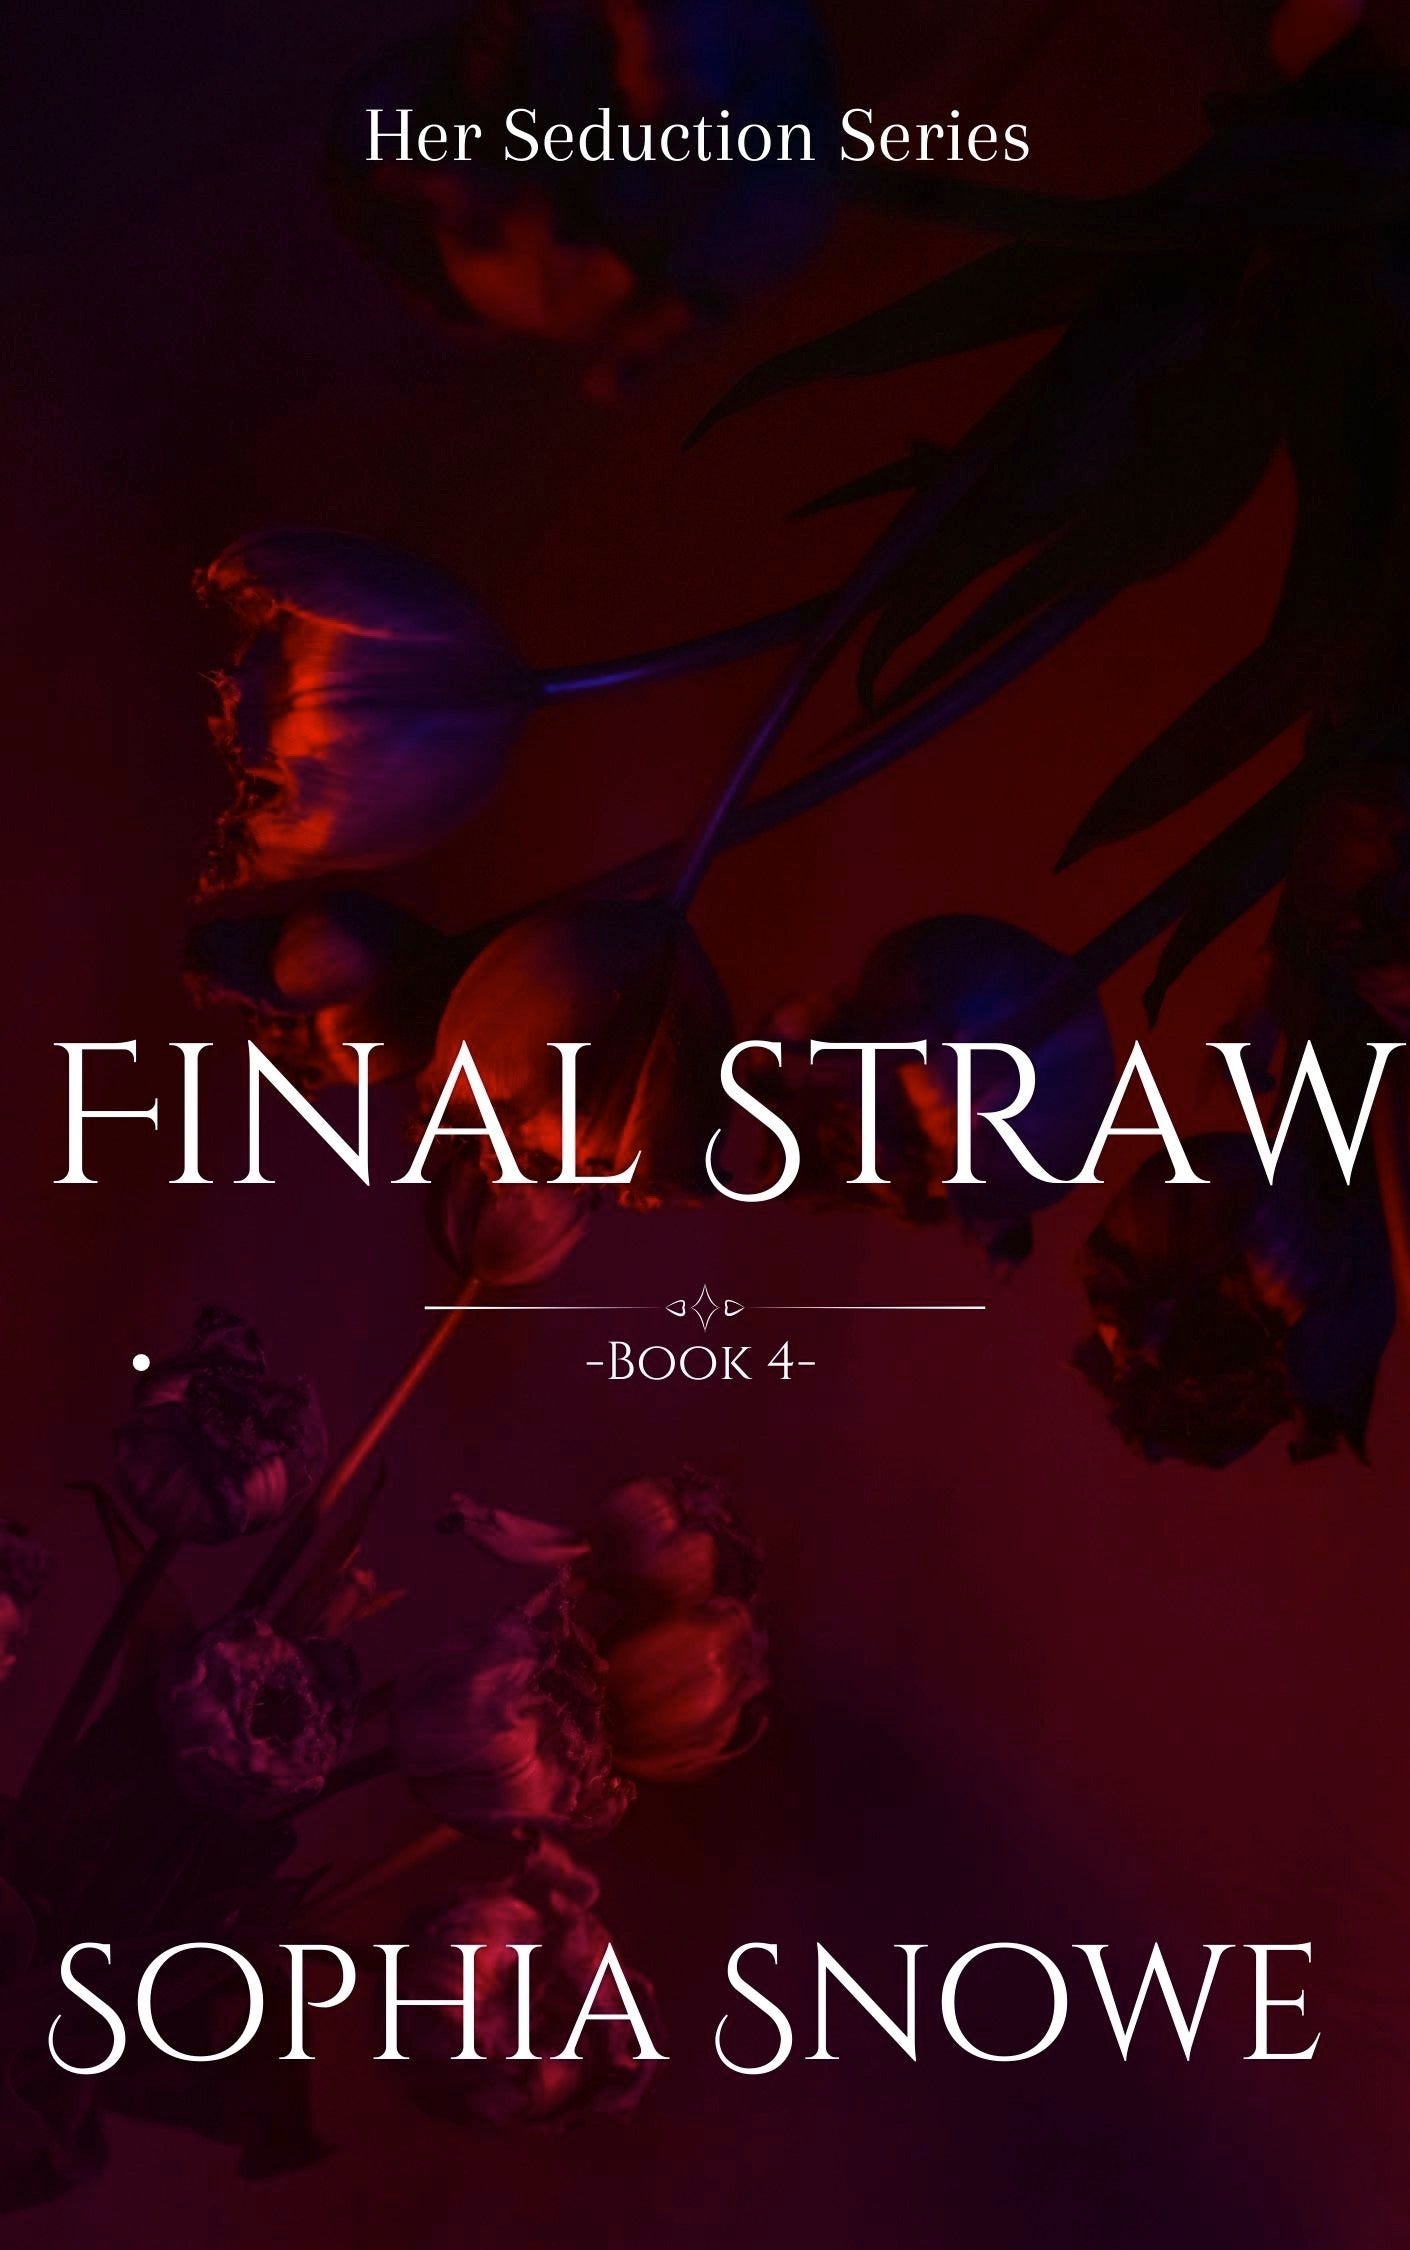 Final Straw: Her Seduction Series Book 4